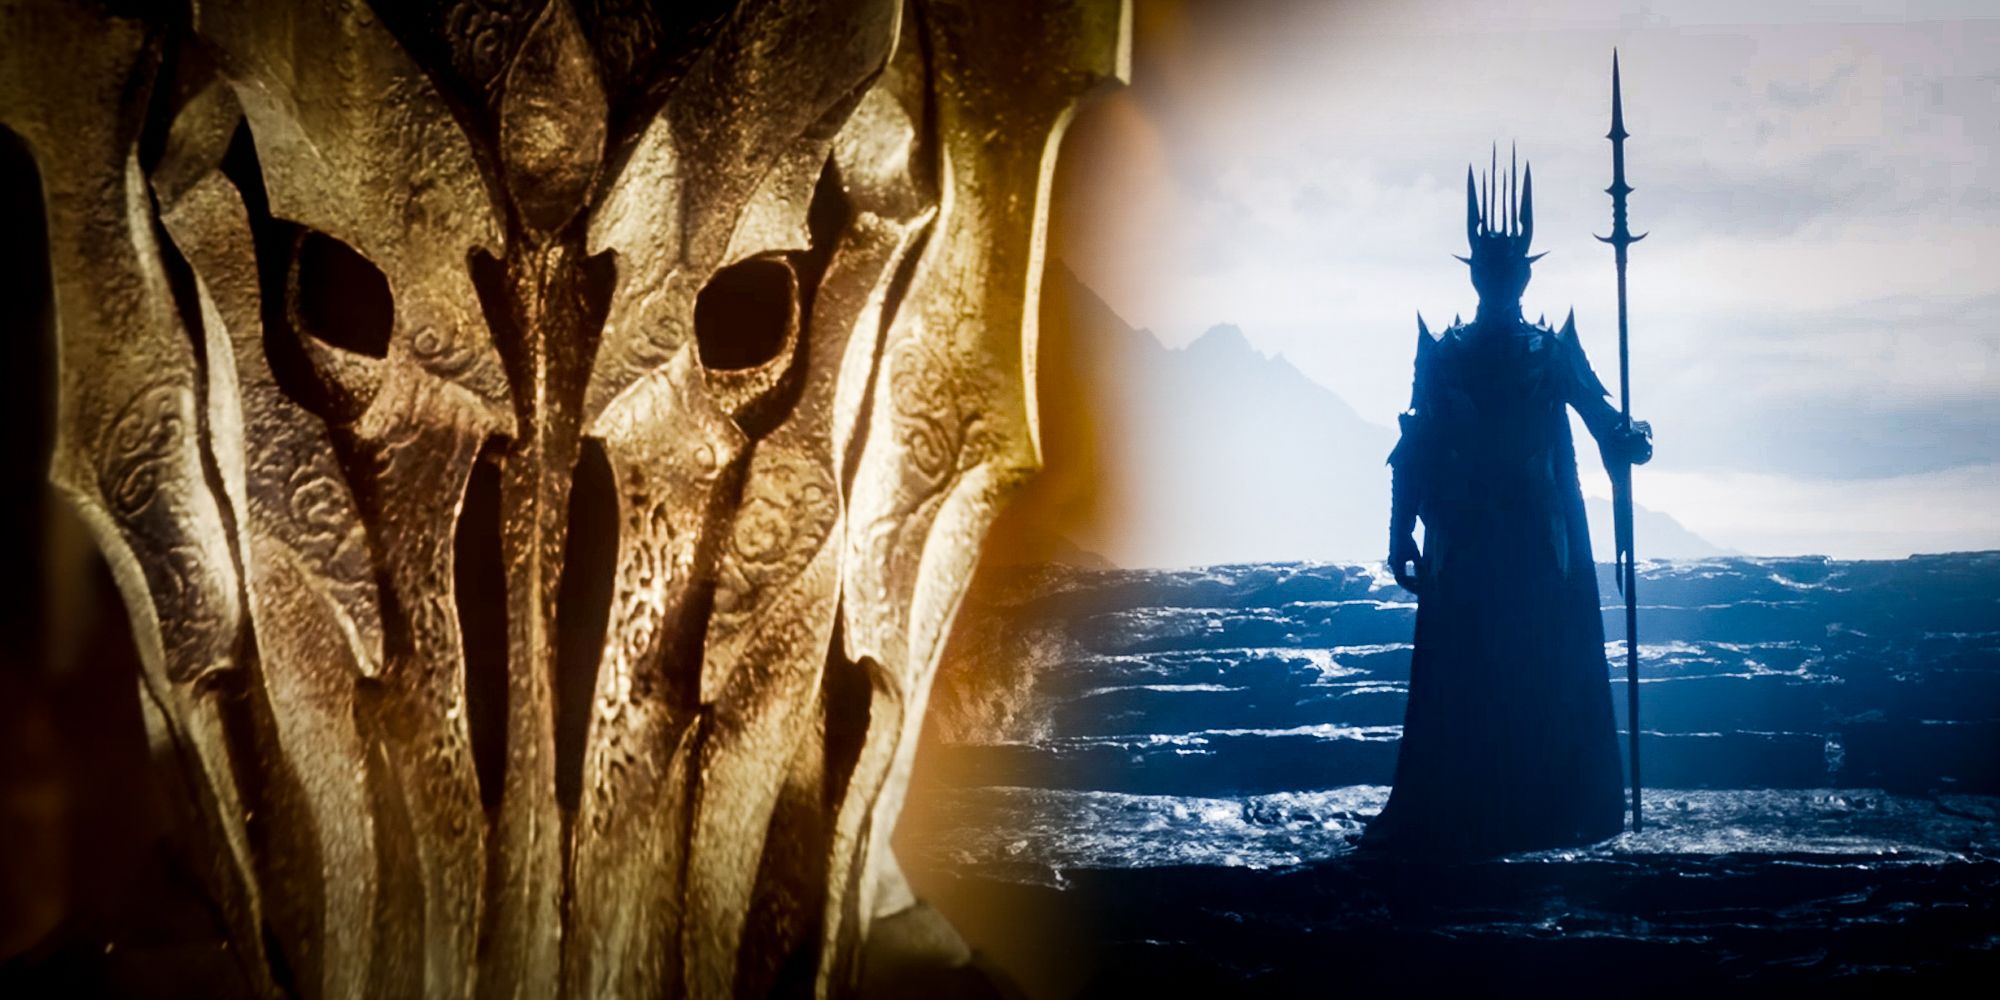 Sauron from Lord of the Rings and The Rings of Power